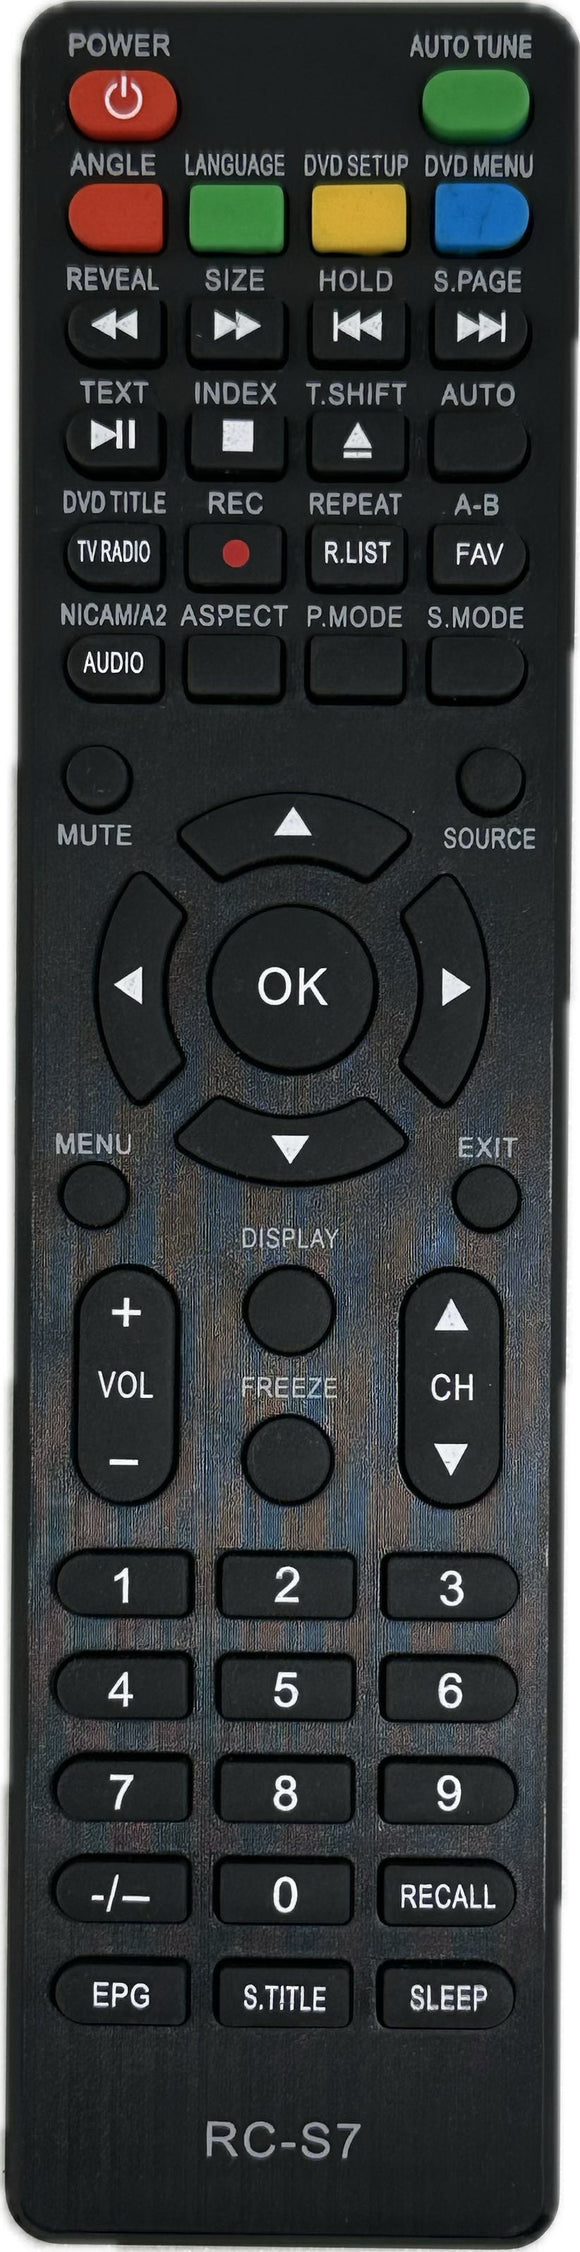 Sphere S7LED235BT TV Replacement Remote Control